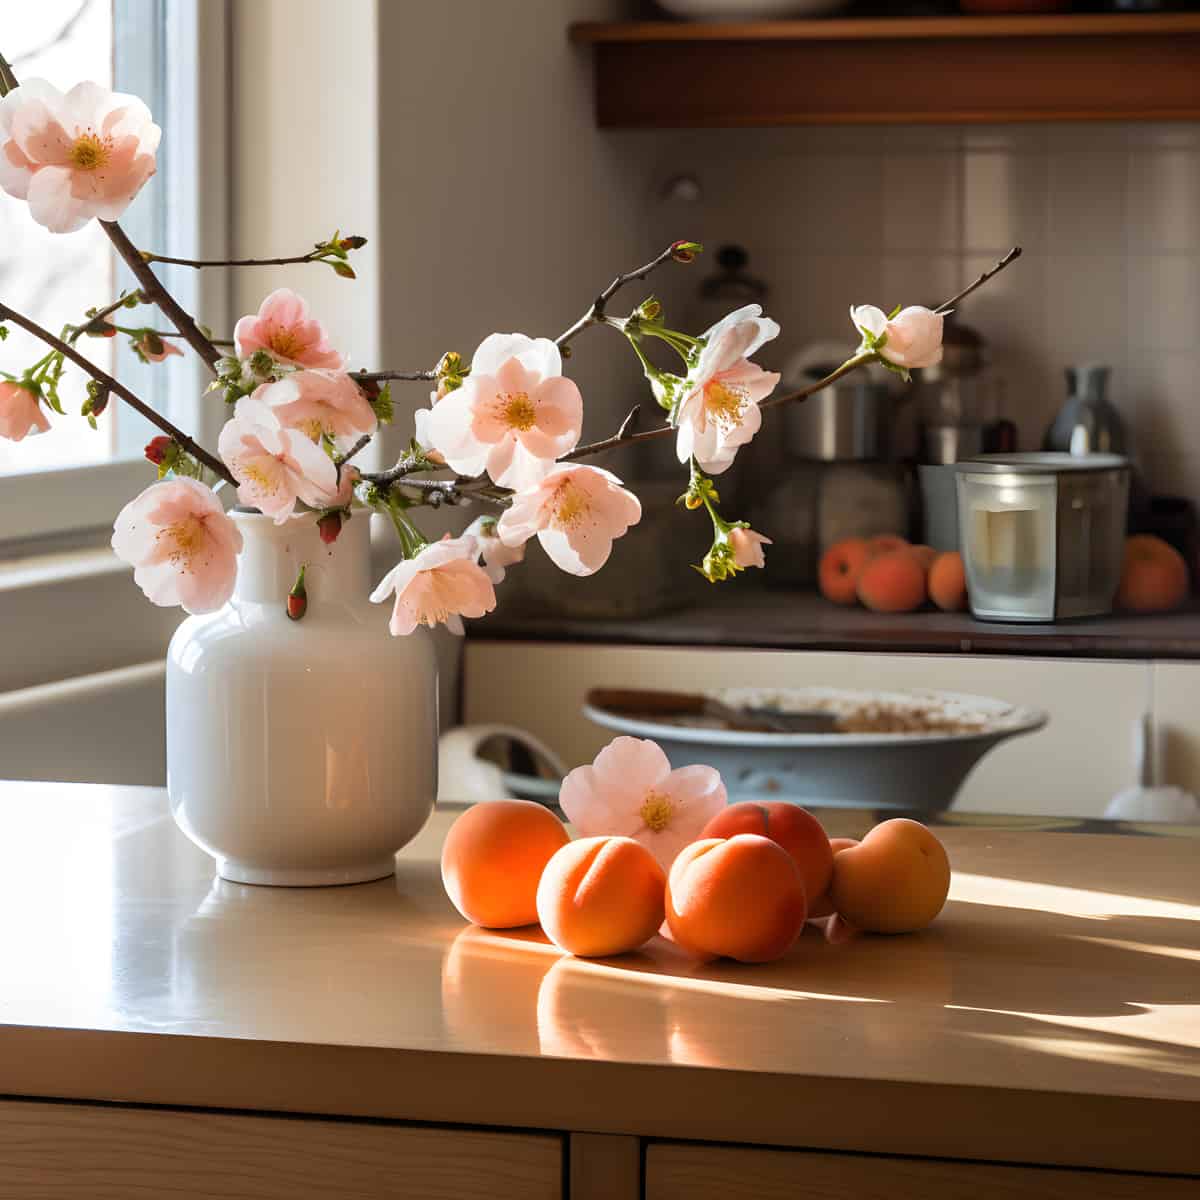 Japanese Apricot on a kitchen counter